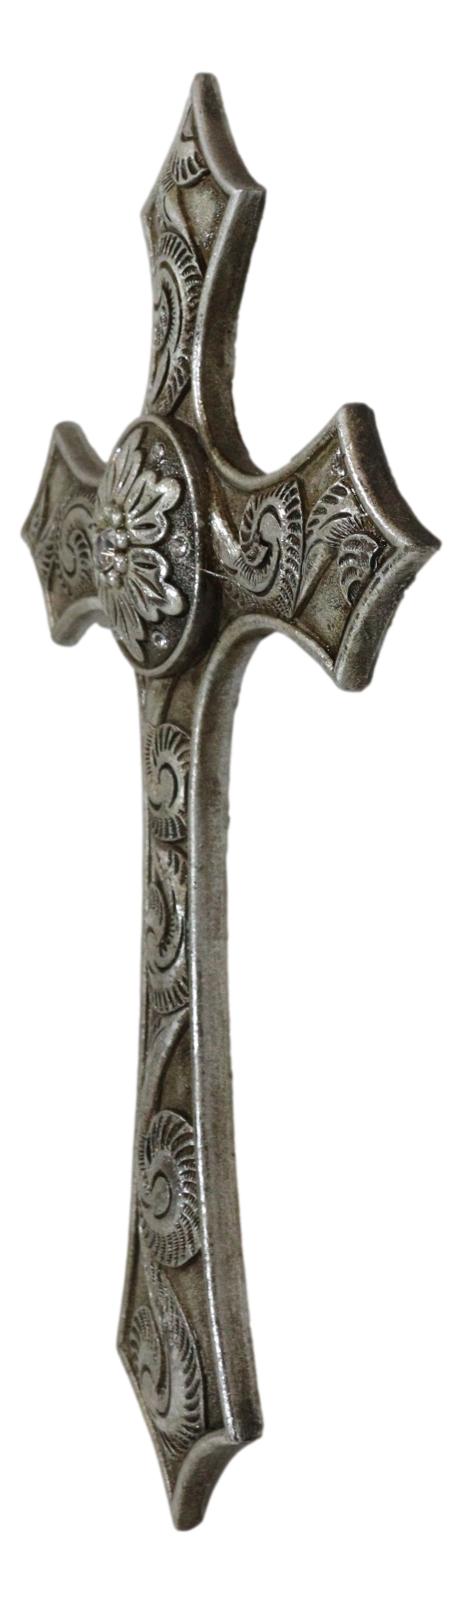 Rustic Western Silver Concho With Ornate Shell Pattern Wall Cross Decor Plaque